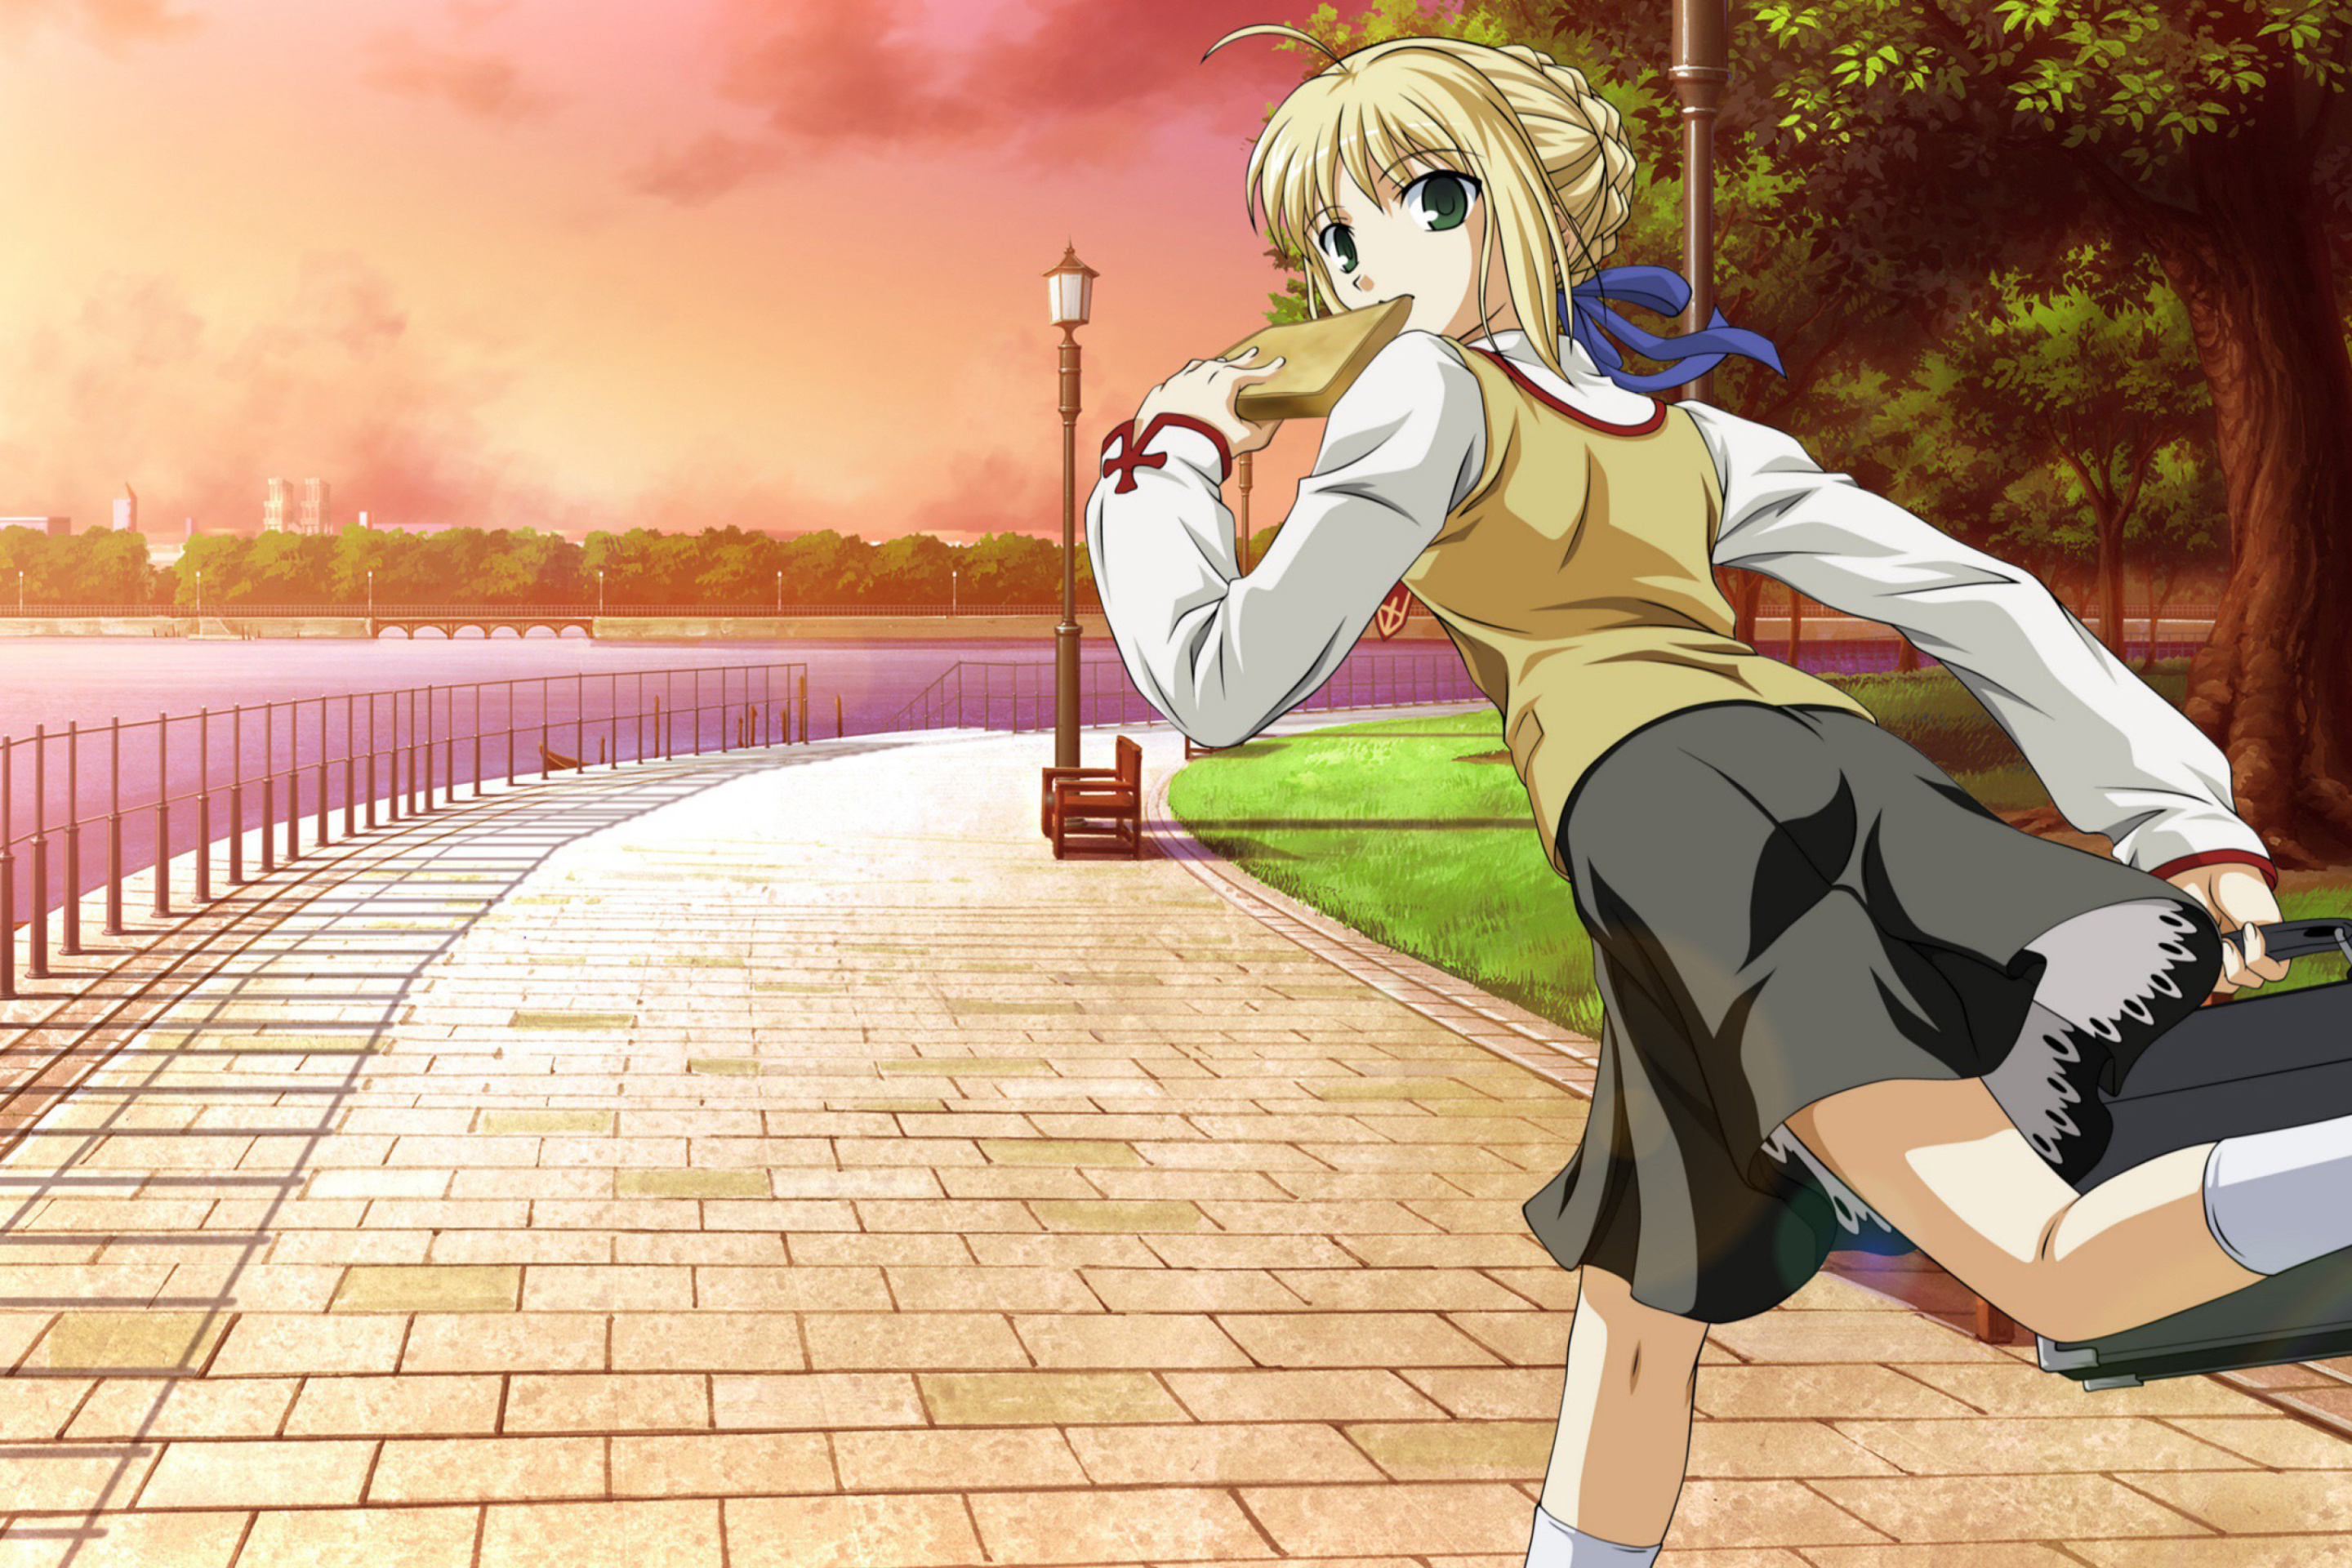 Fate stay night Saber Anime wallpaper 2880x1920